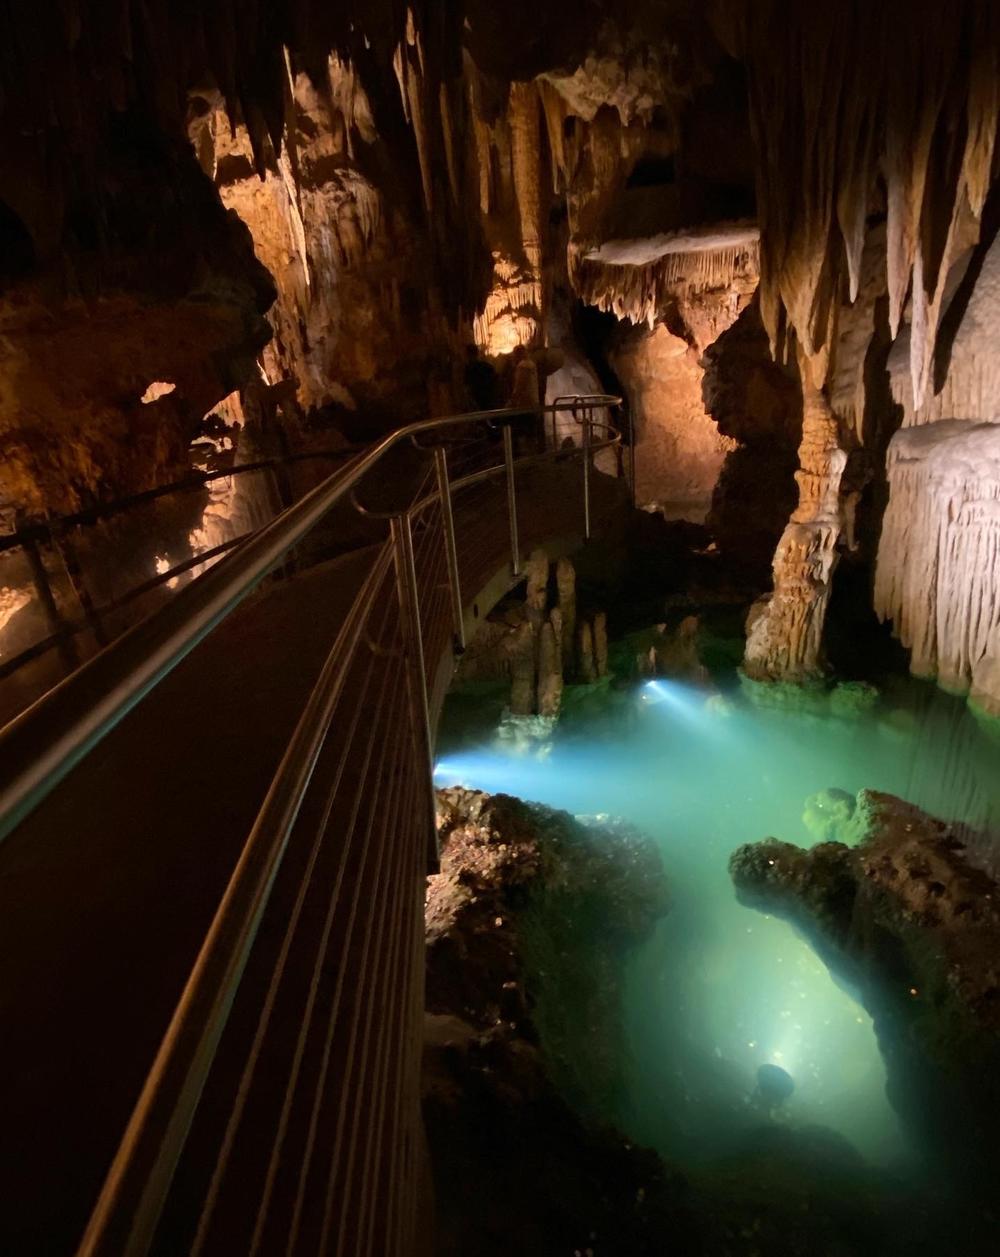 Pools of glassy, smooth water reflect the stalactites above. It creates the illusion of an underwater stone city.